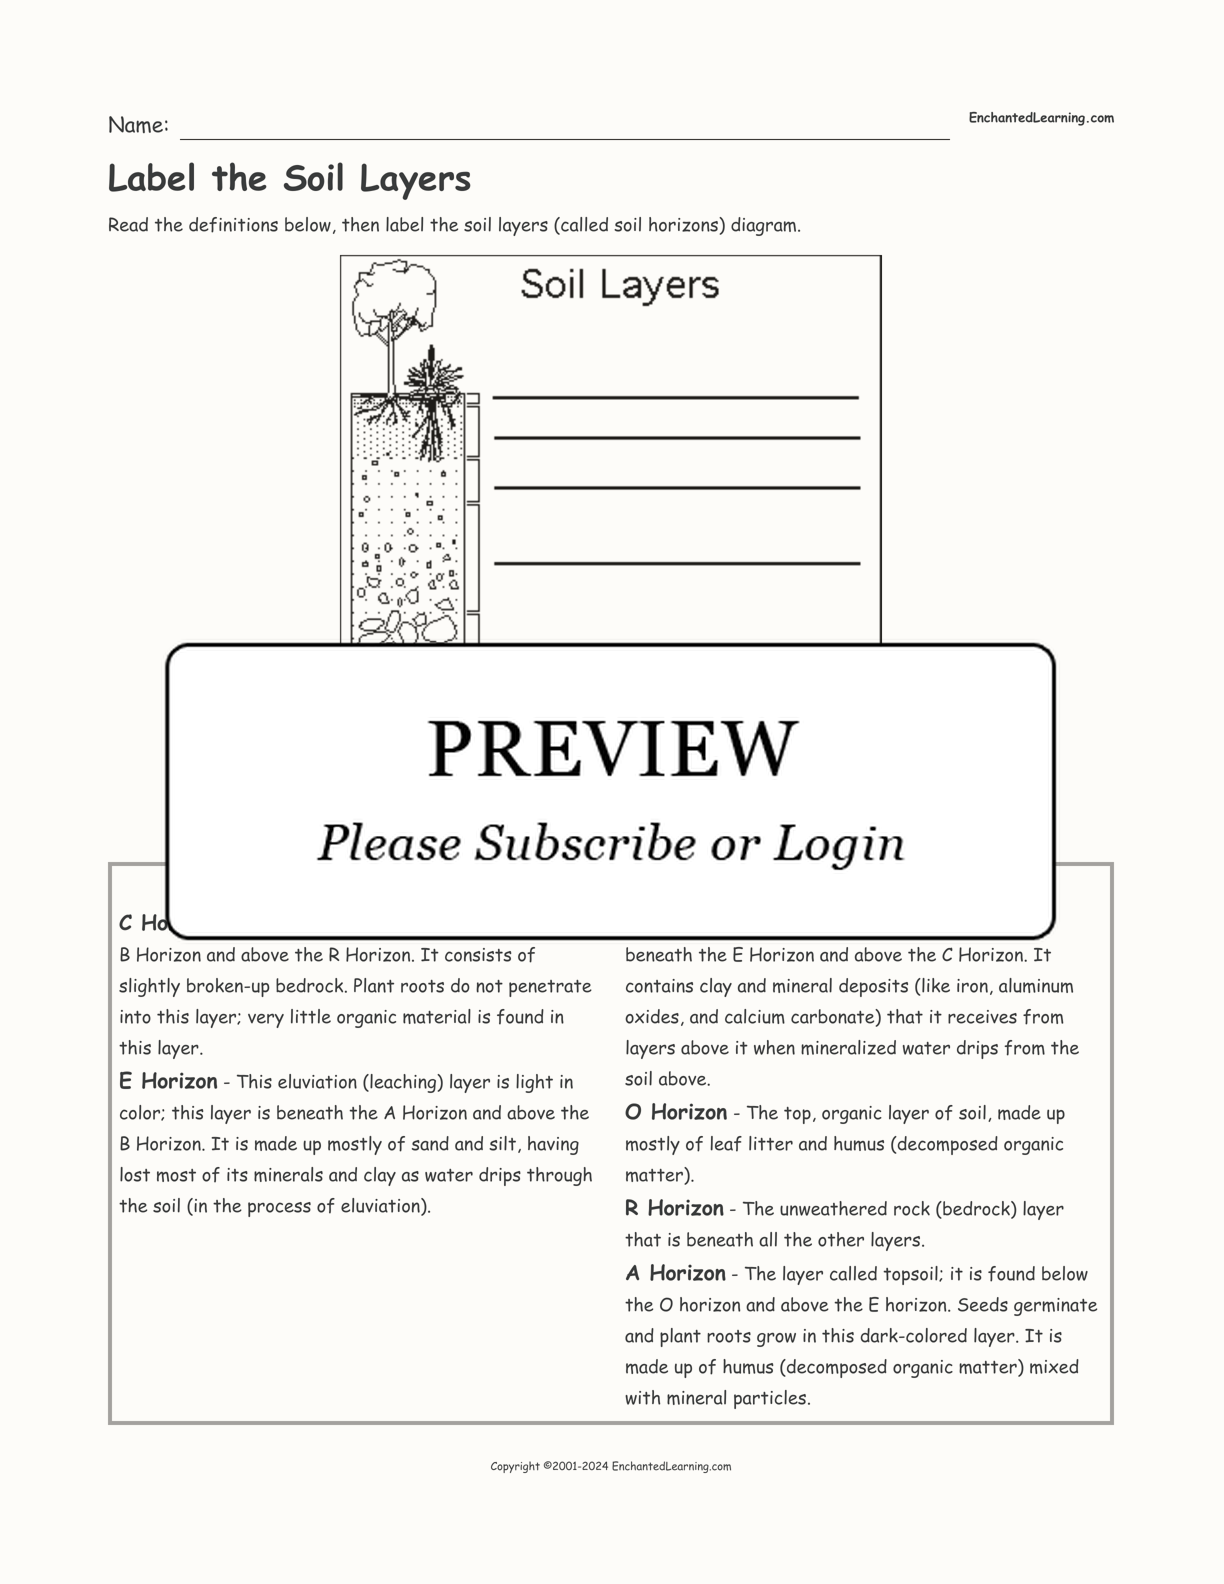 Label the Soil Layers interactive worksheet page 1